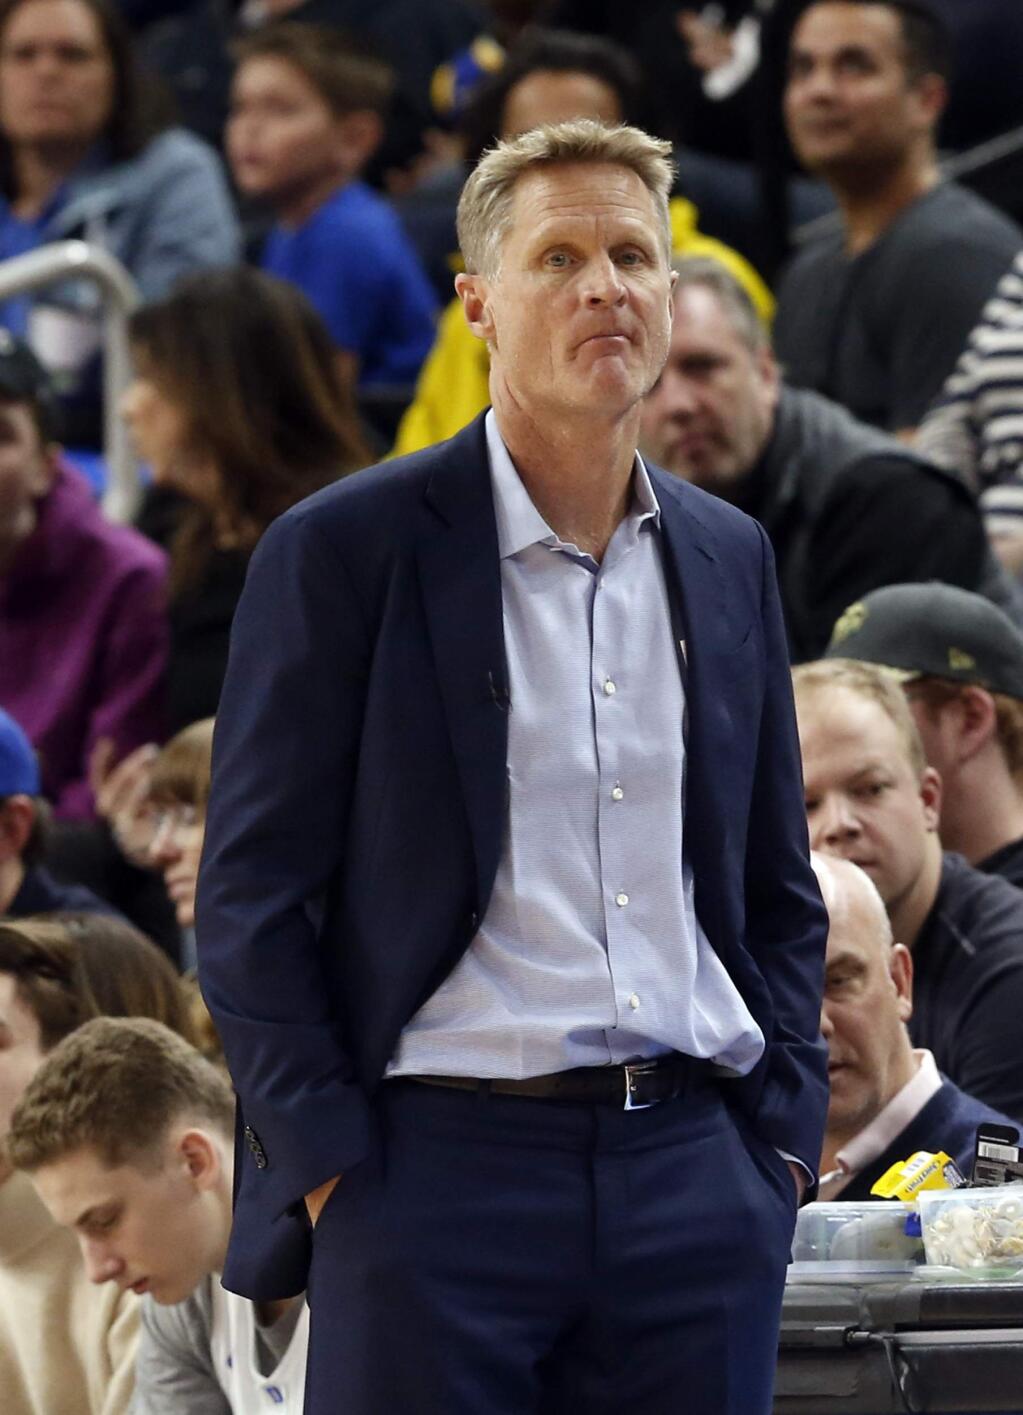 Golden State Warriors' head coach Steve Kerr watches his players in the second half of an NBA basketball game against the Minnesota Timberwolves Sunday, March 11, 2018, in Minneapolis. The Timberwolves won 109-103. (AP Photo/Jim Mone)